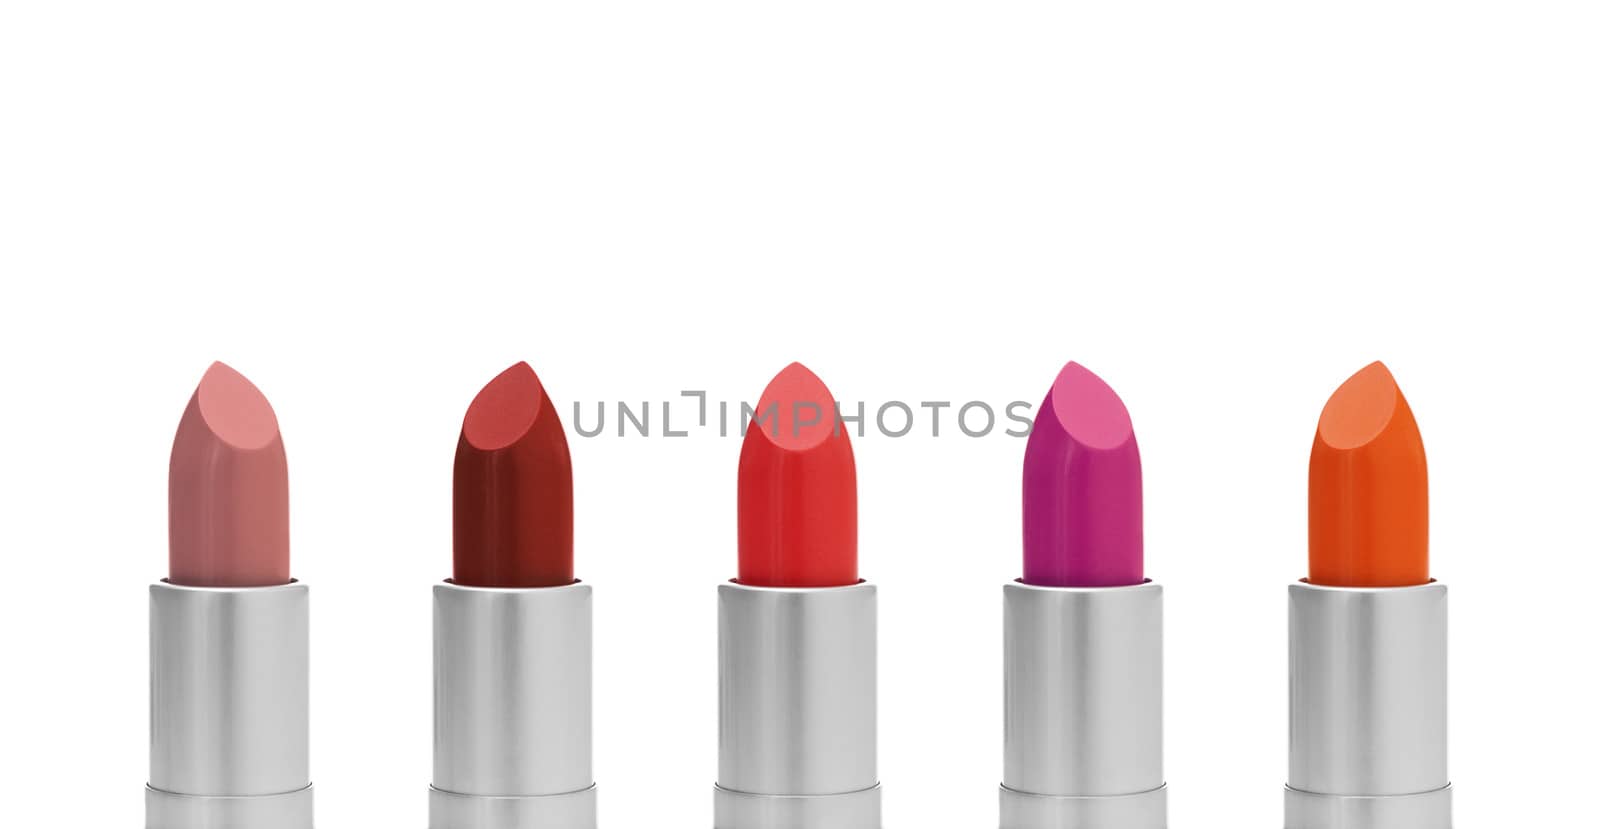 Lipstick of different colors, isolated on white background.